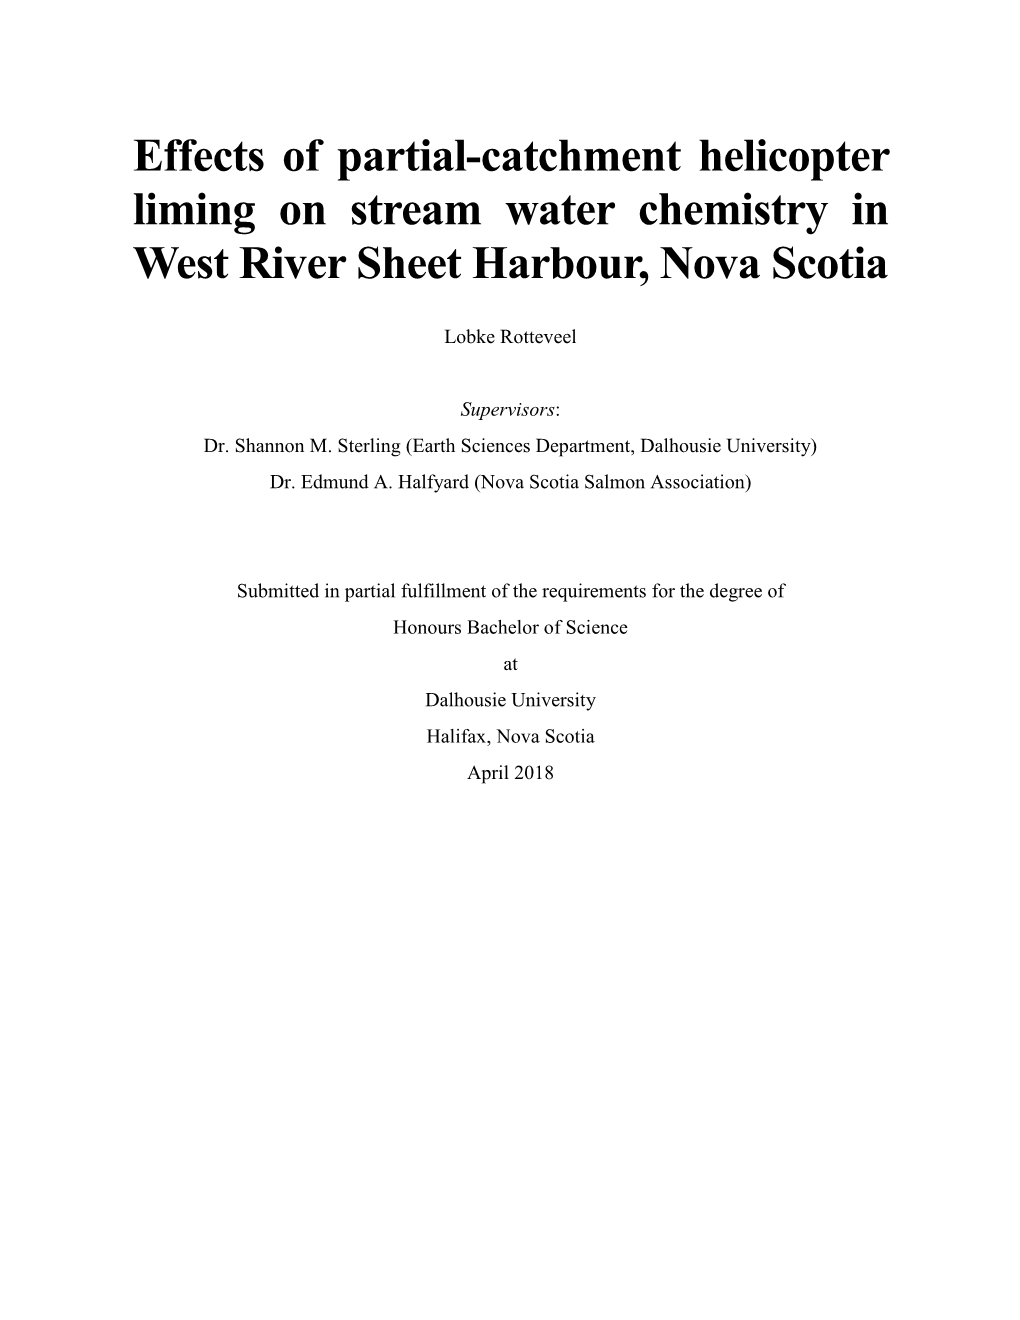 Effects of Partial-Catchment Helicopter Liming on Stream Water Chemistry in West River Sheet Harbour, Nova Scotia